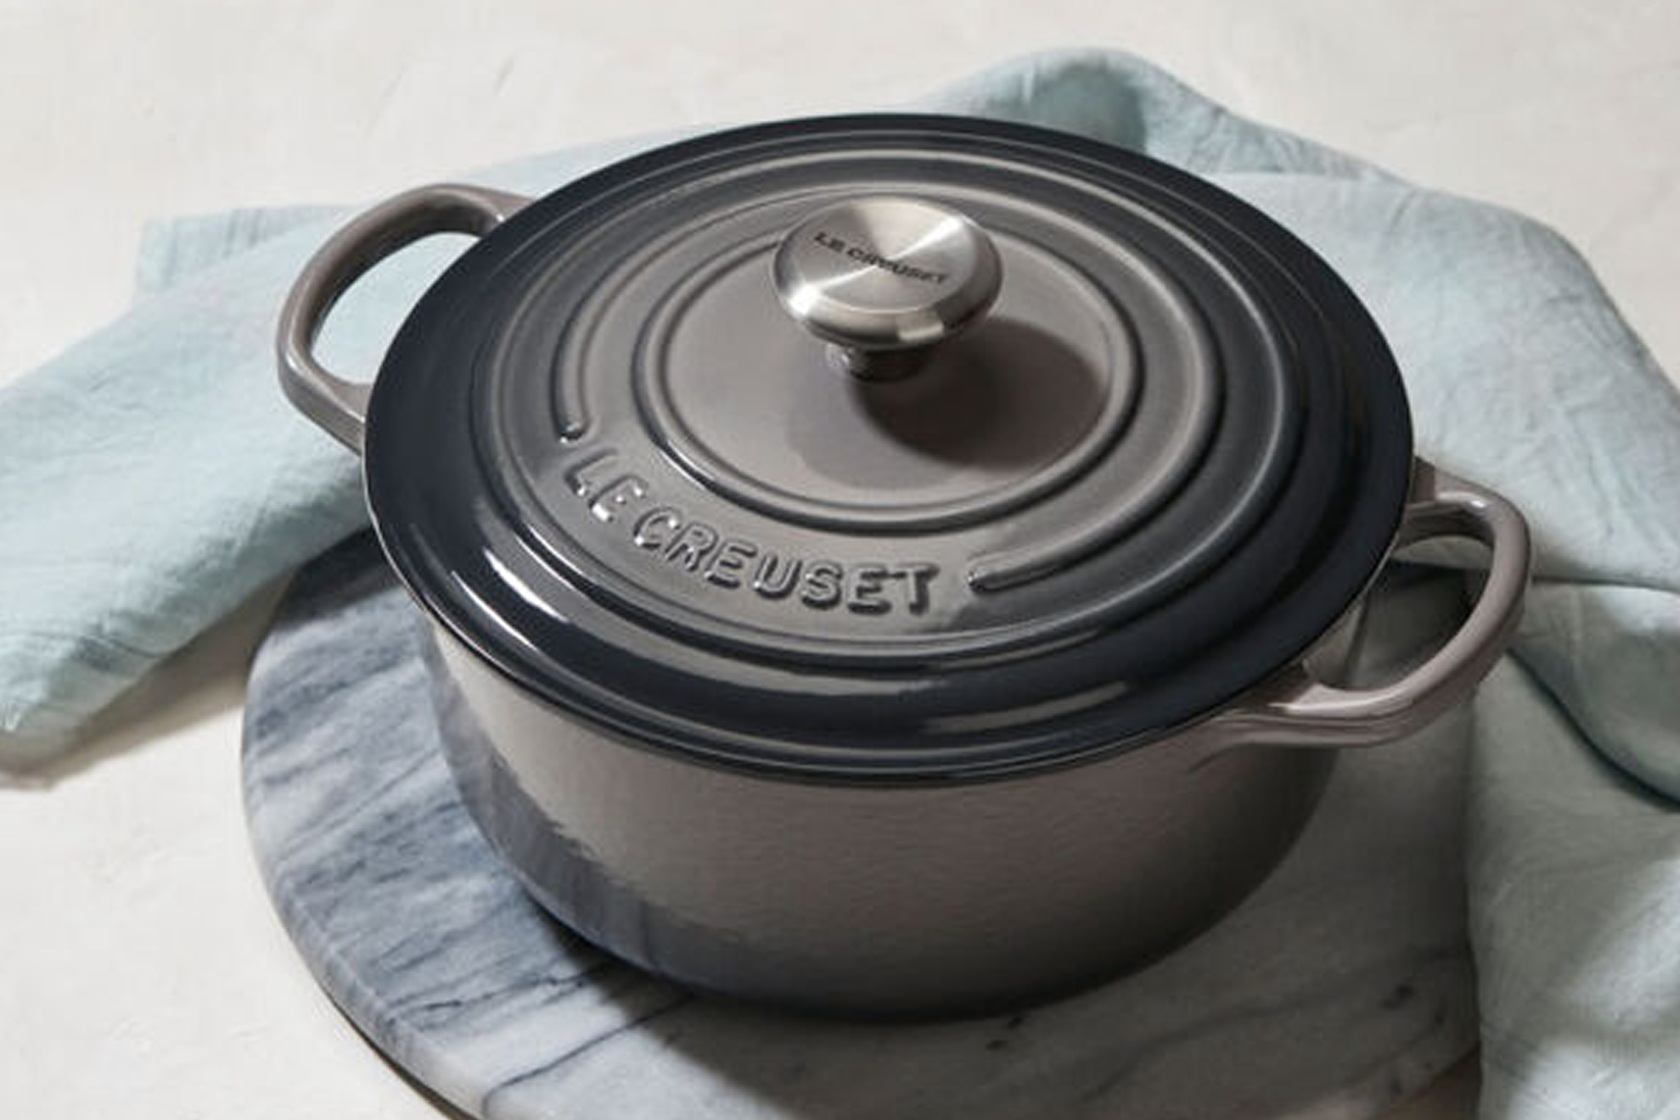 Le Creuset Just Dropped a New Colorway That Screams Fall – SheKnows